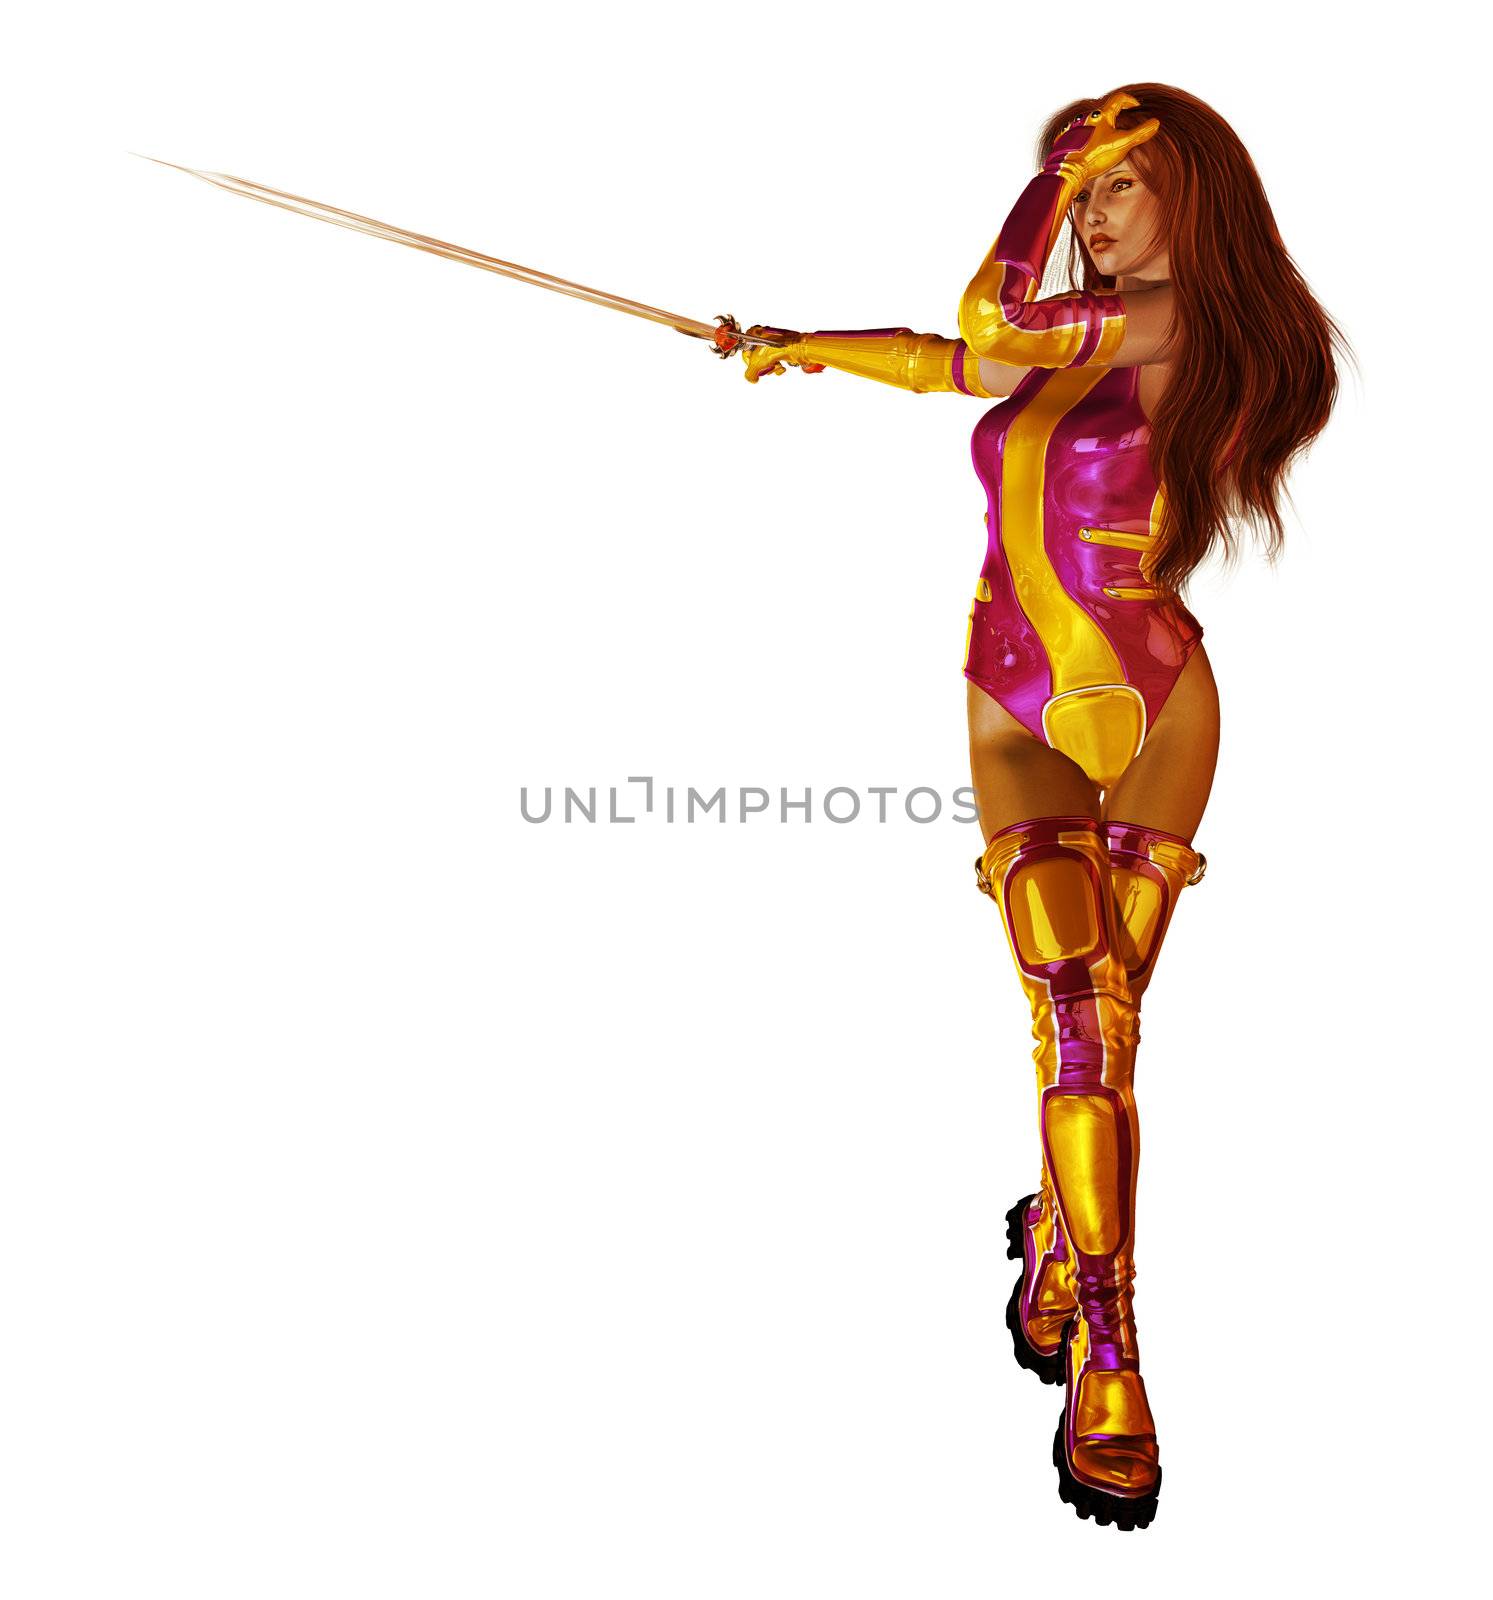 Auburn haired science fiction woman warrior with golden and fushia pink sci fi outfit holding a sword